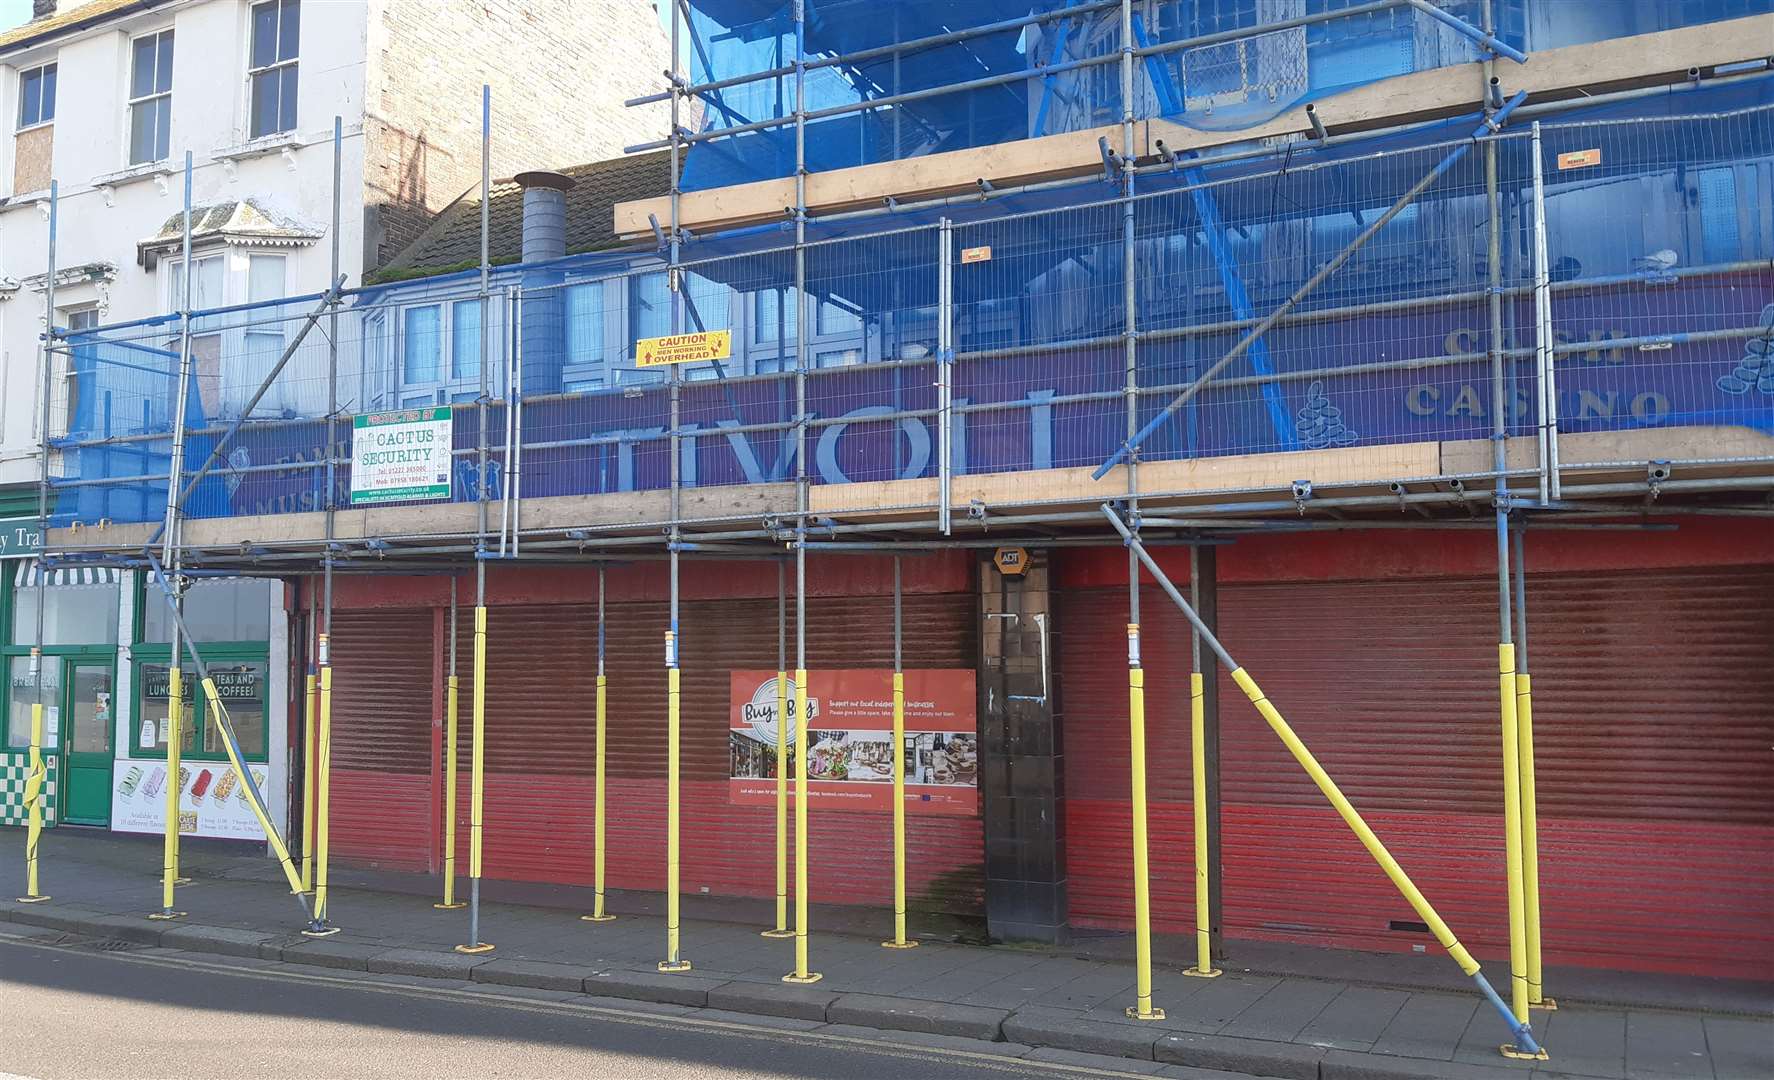 The former Tivoli amusements site in Herne Bay has been an eyesore for years